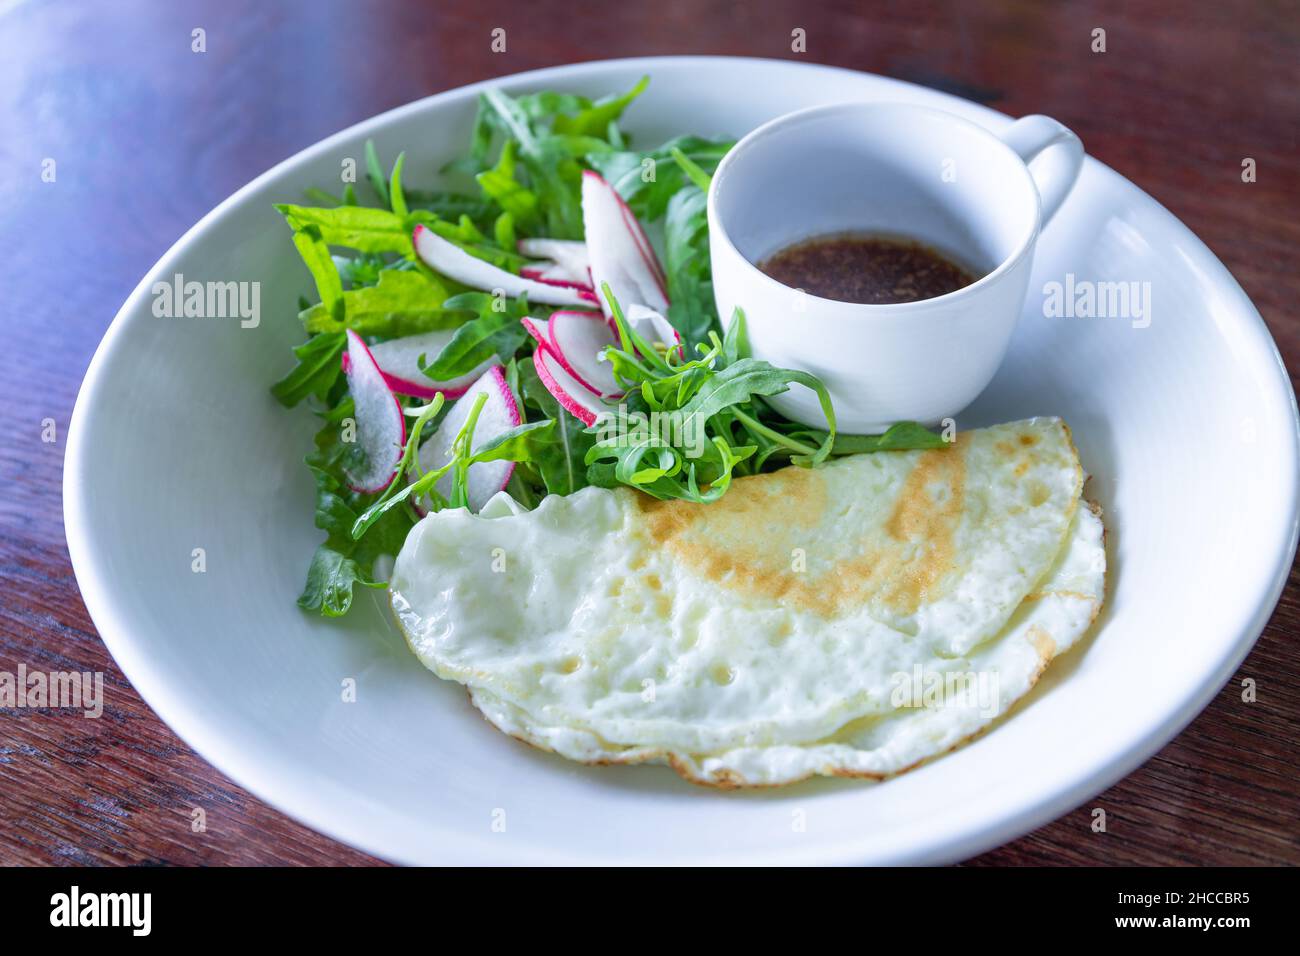 Fried egg white with salad and sesame balsamic dressing healthy breakfast Stock Photo